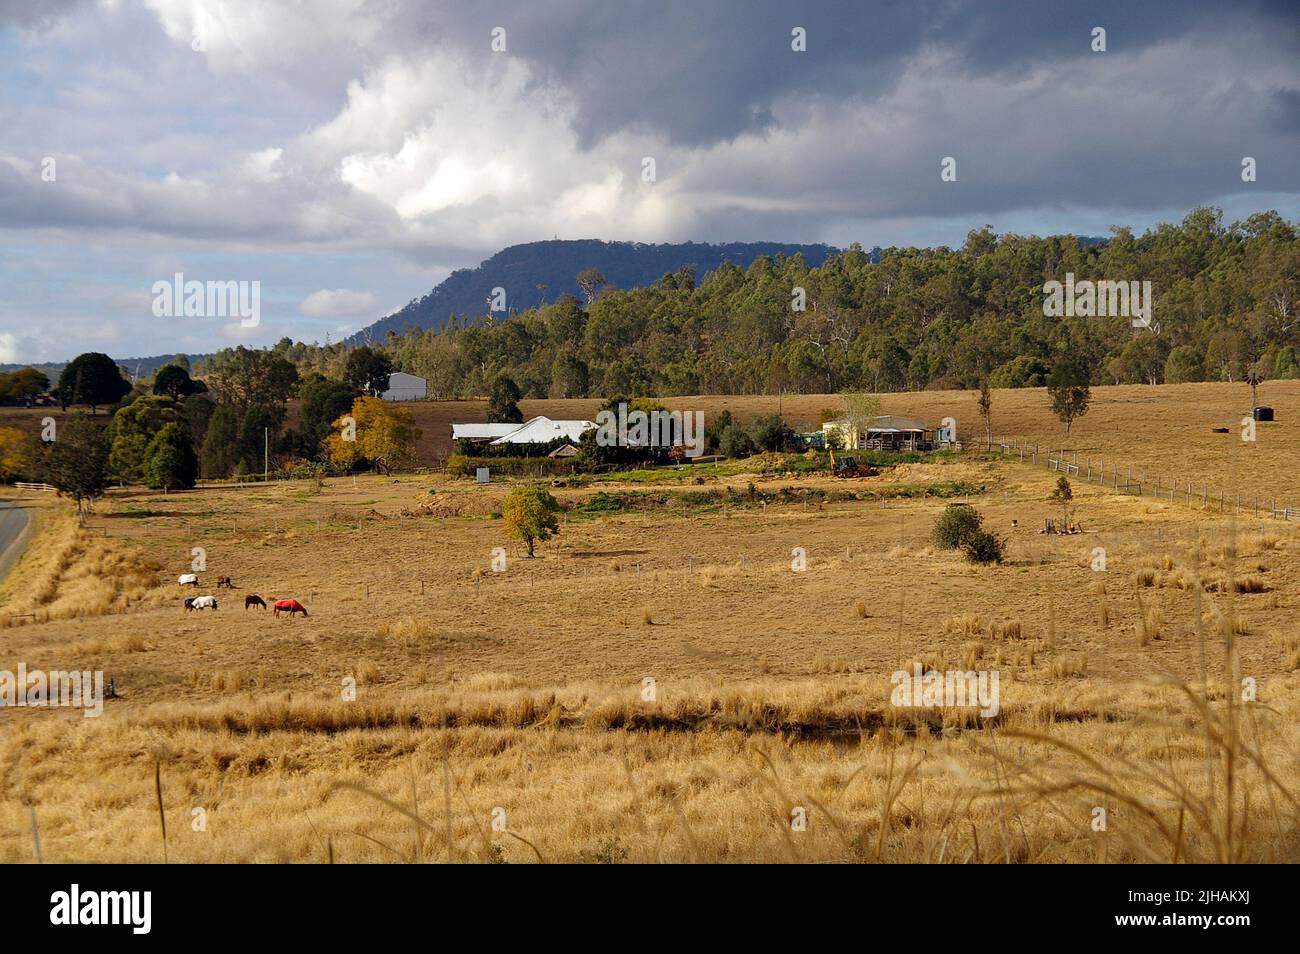 Tamborine Mountain seen from grassy farmland, inland to the west. Dry, parched, winter landscape with gathering clouds. Scenic Rim, Australia. Stock Photo